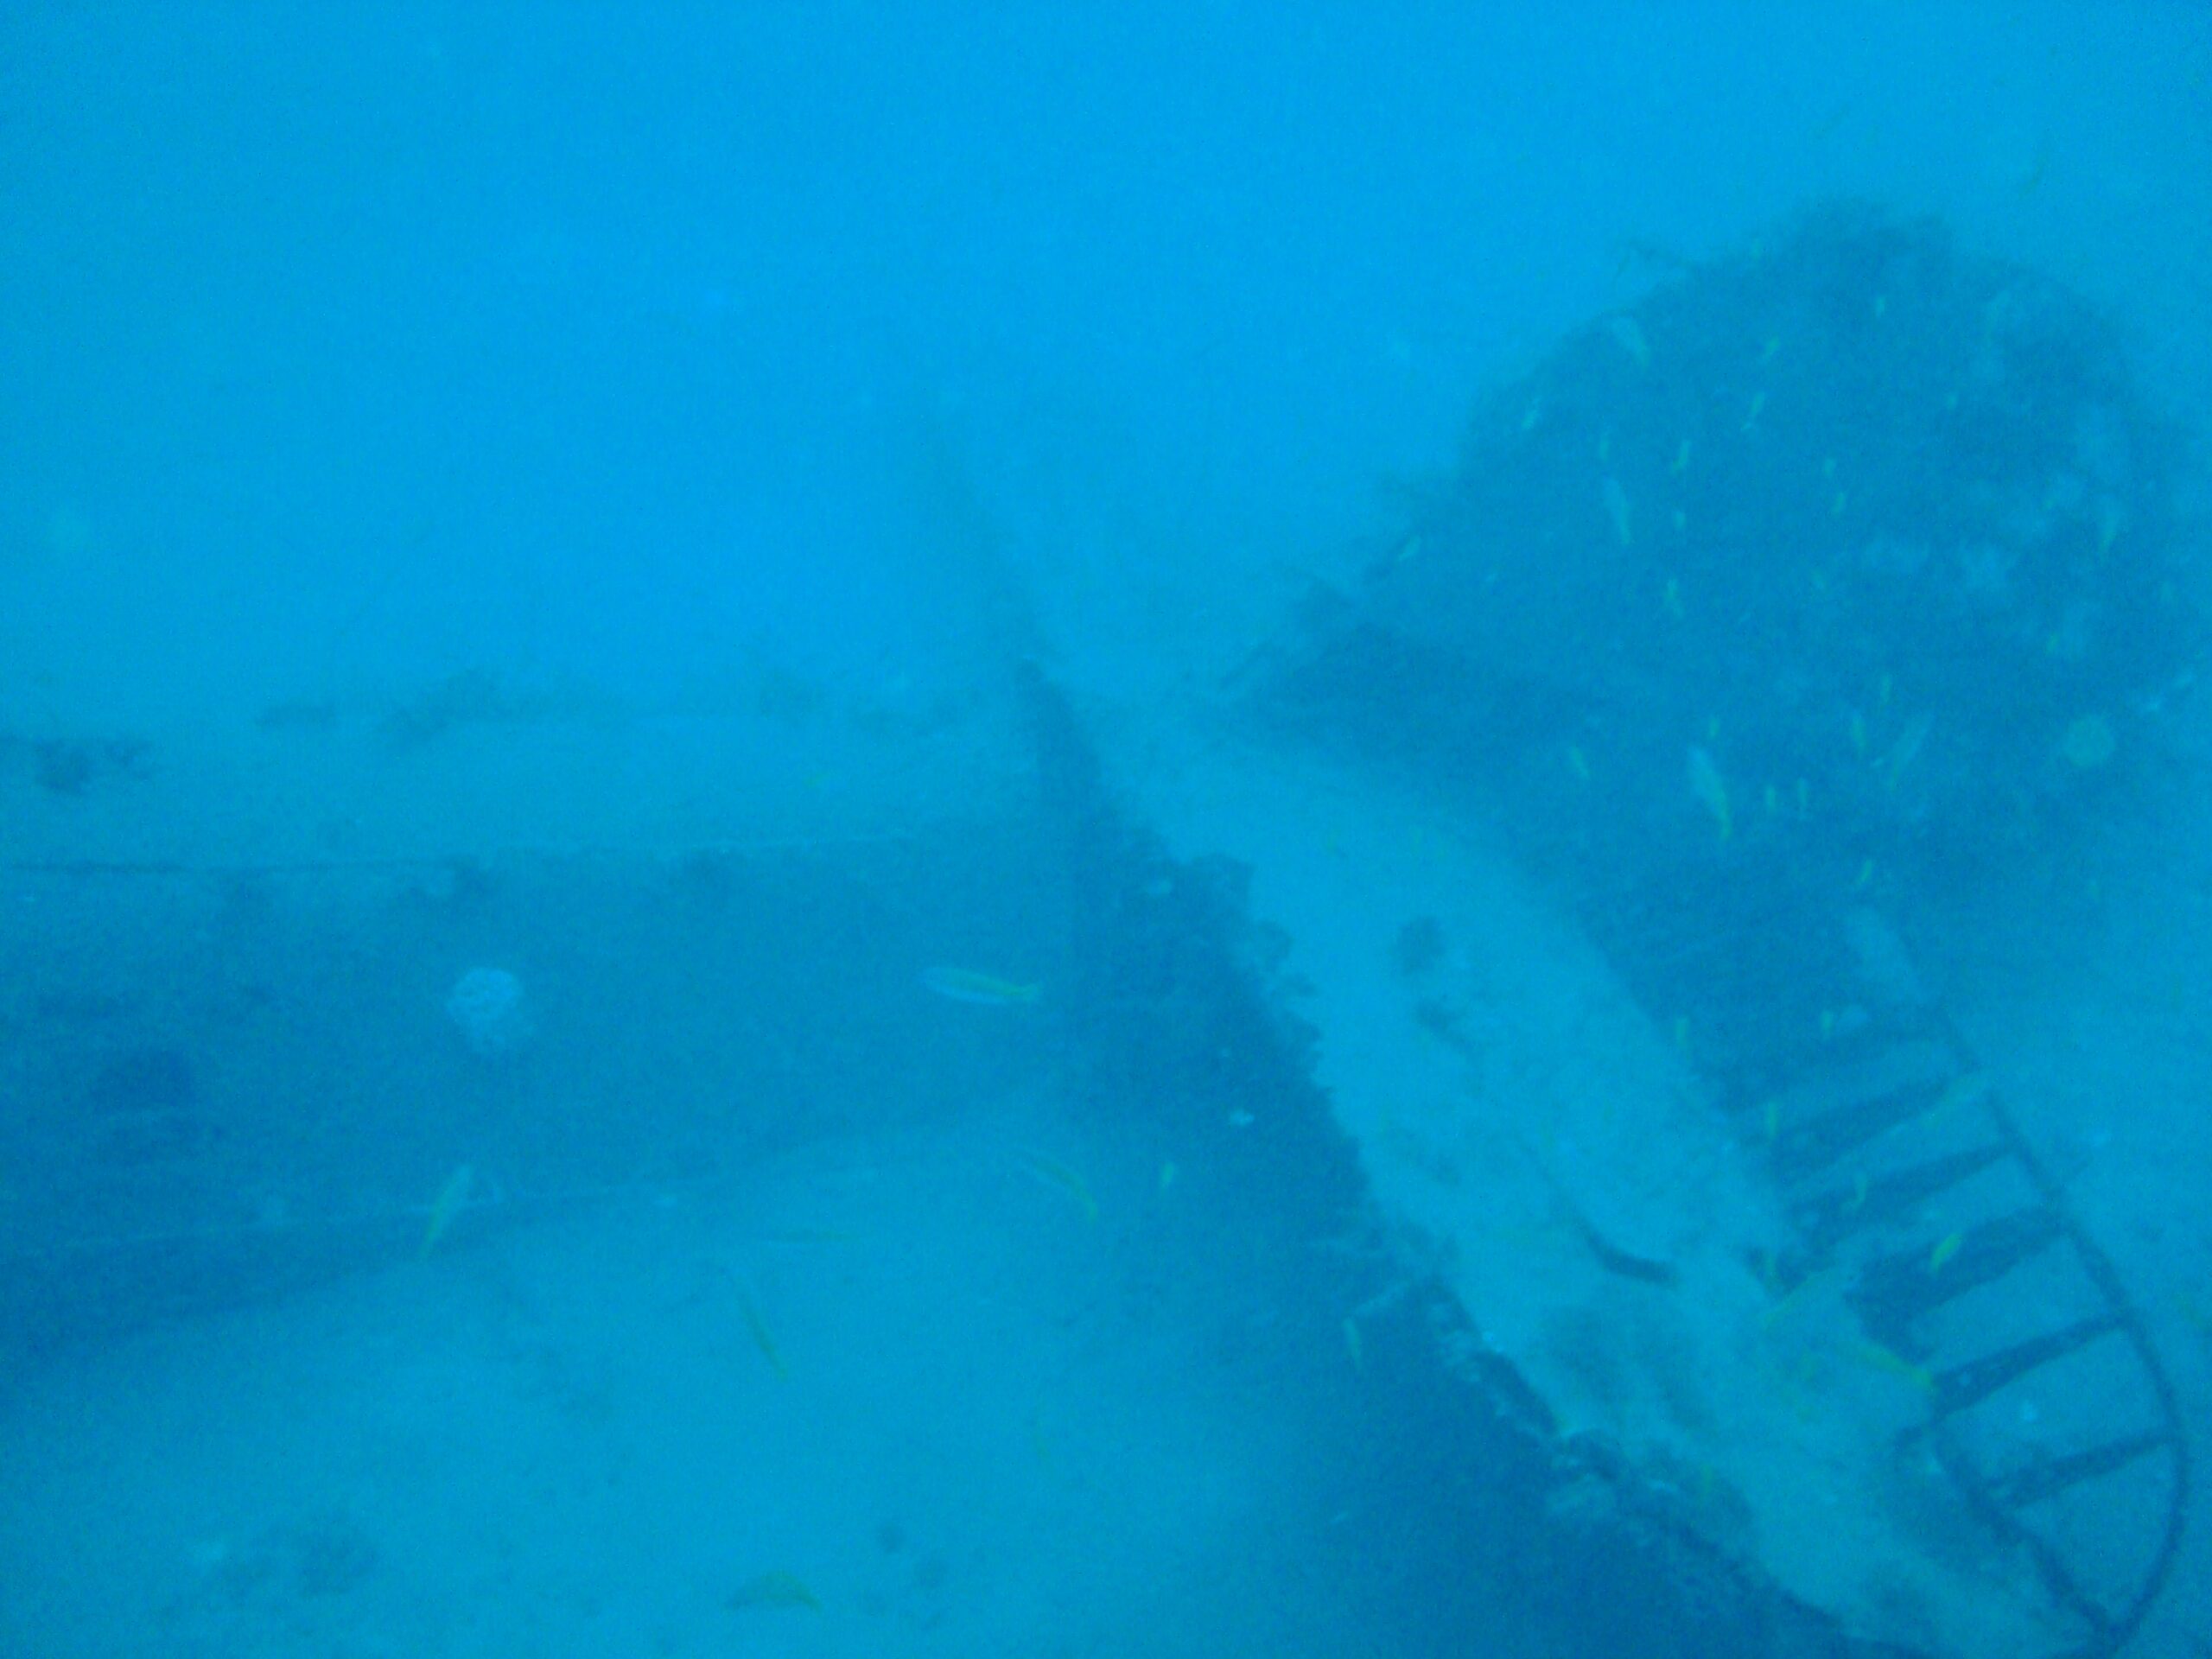 An underwater photo of the fuselage of a plane on the sea floor.